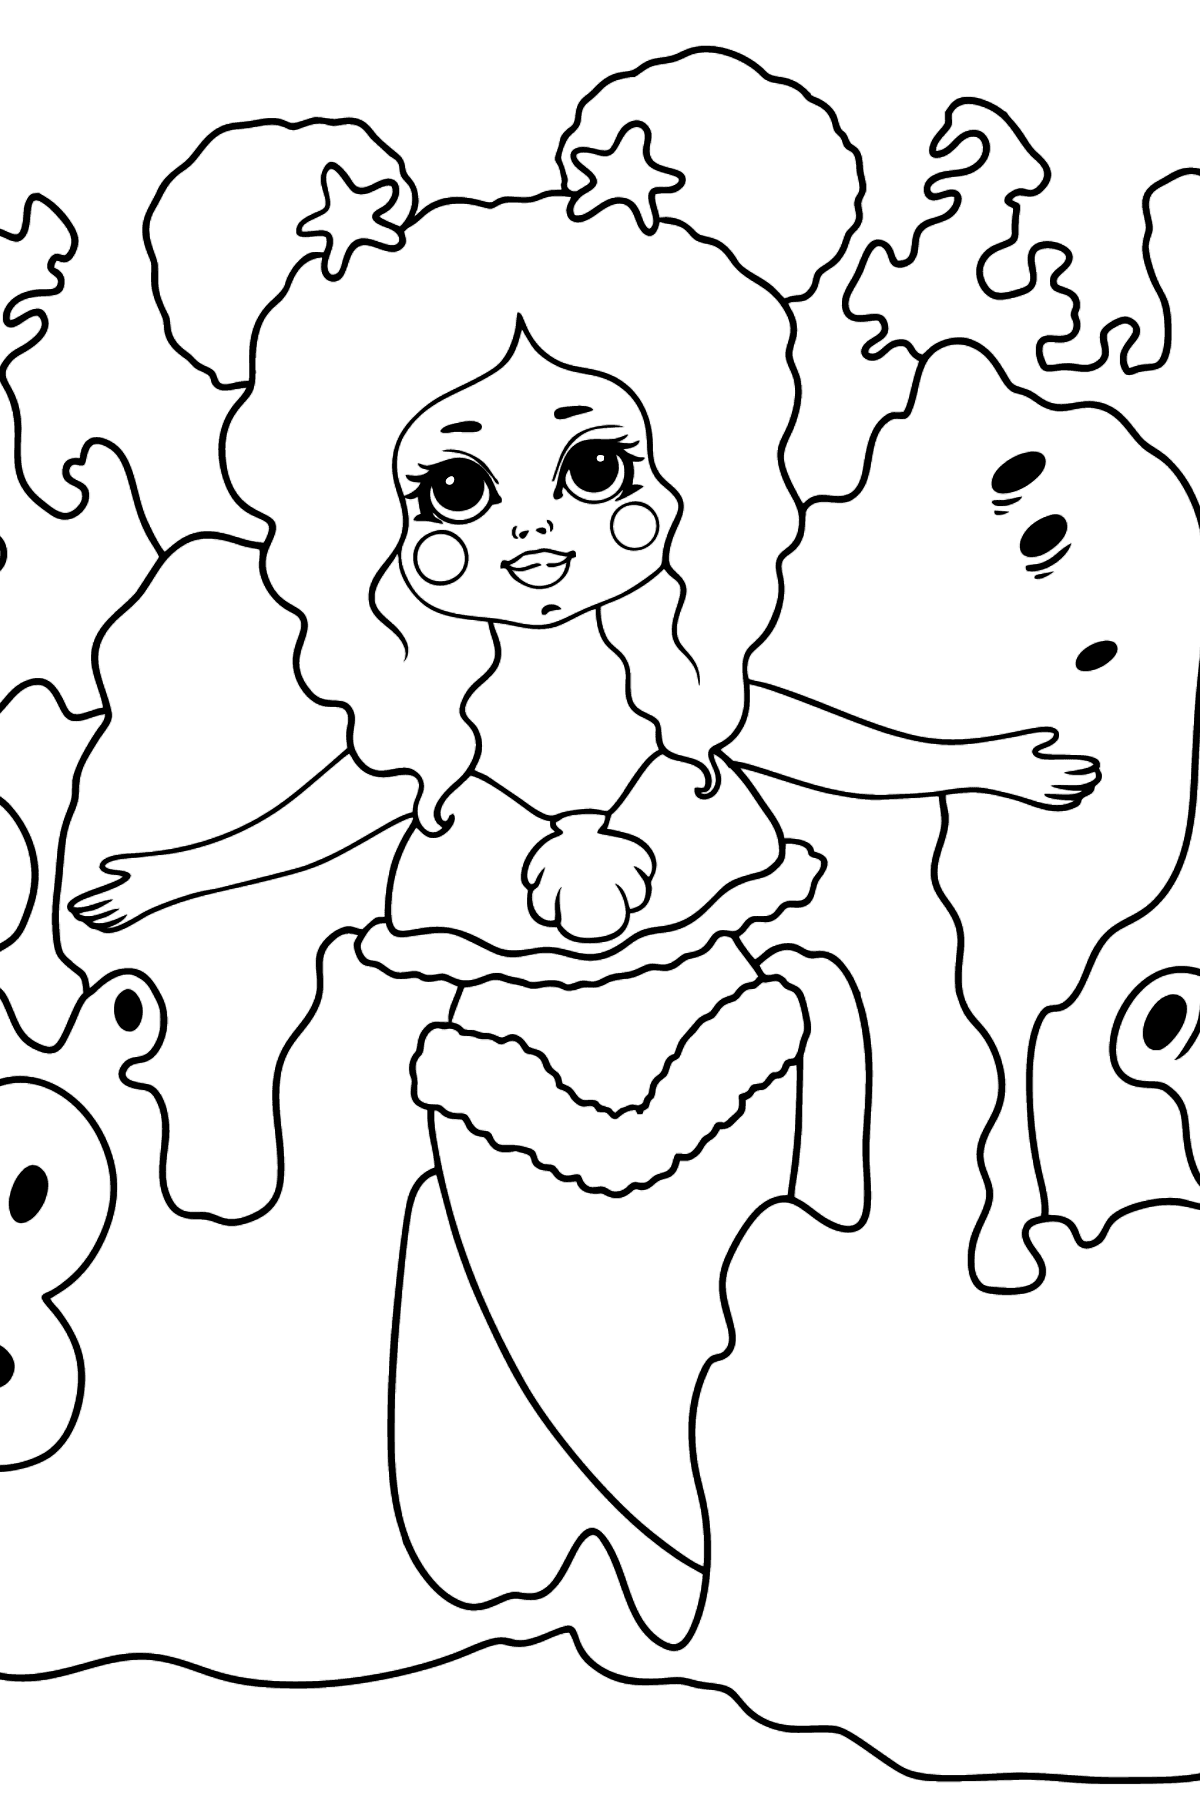 Mermaid and Colorful Corals coloring page - Coloring Pages for Kids